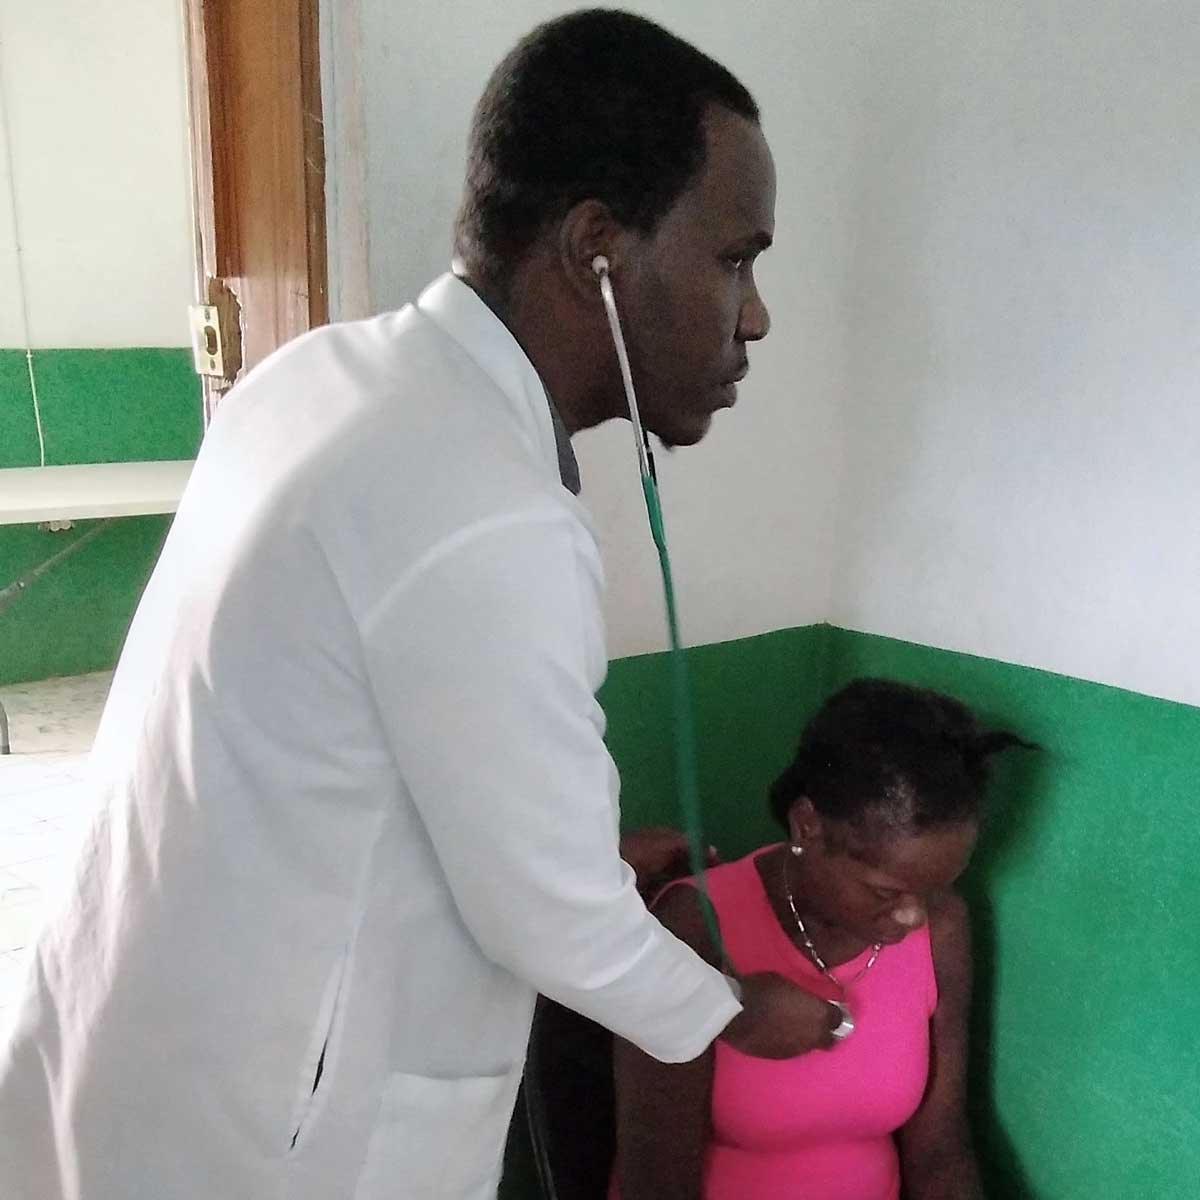 A physician examining a patient.